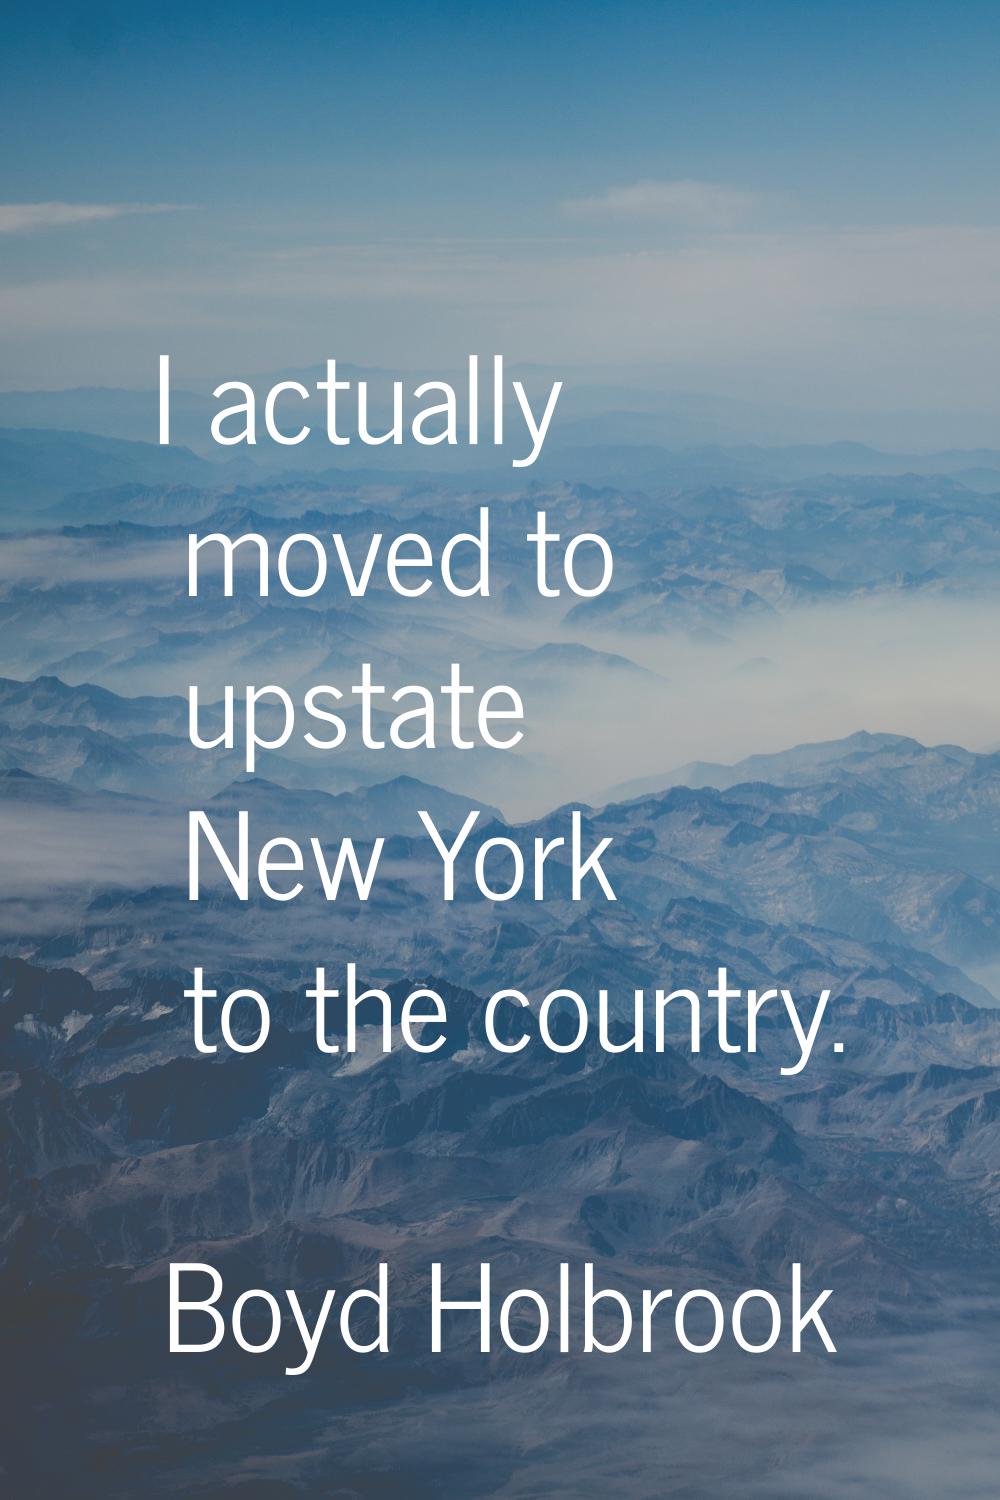 I actually moved to upstate New York to the country.